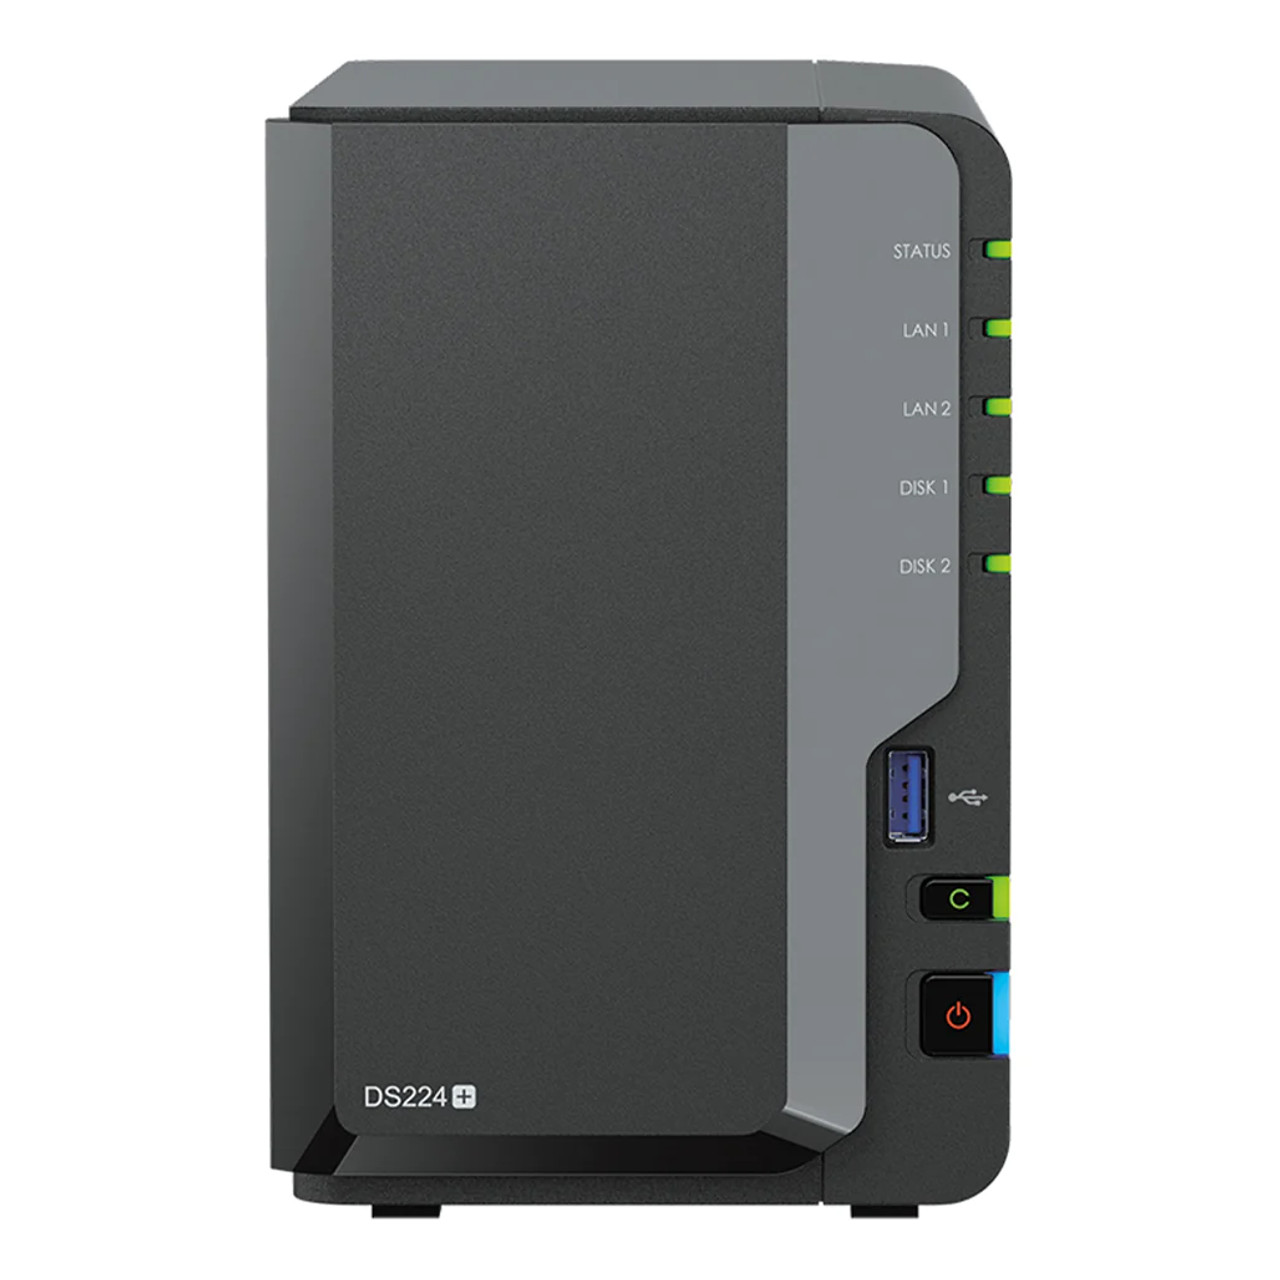 Synology's New DS224+ NAS Upgrades Its Popular 2-Bay Array